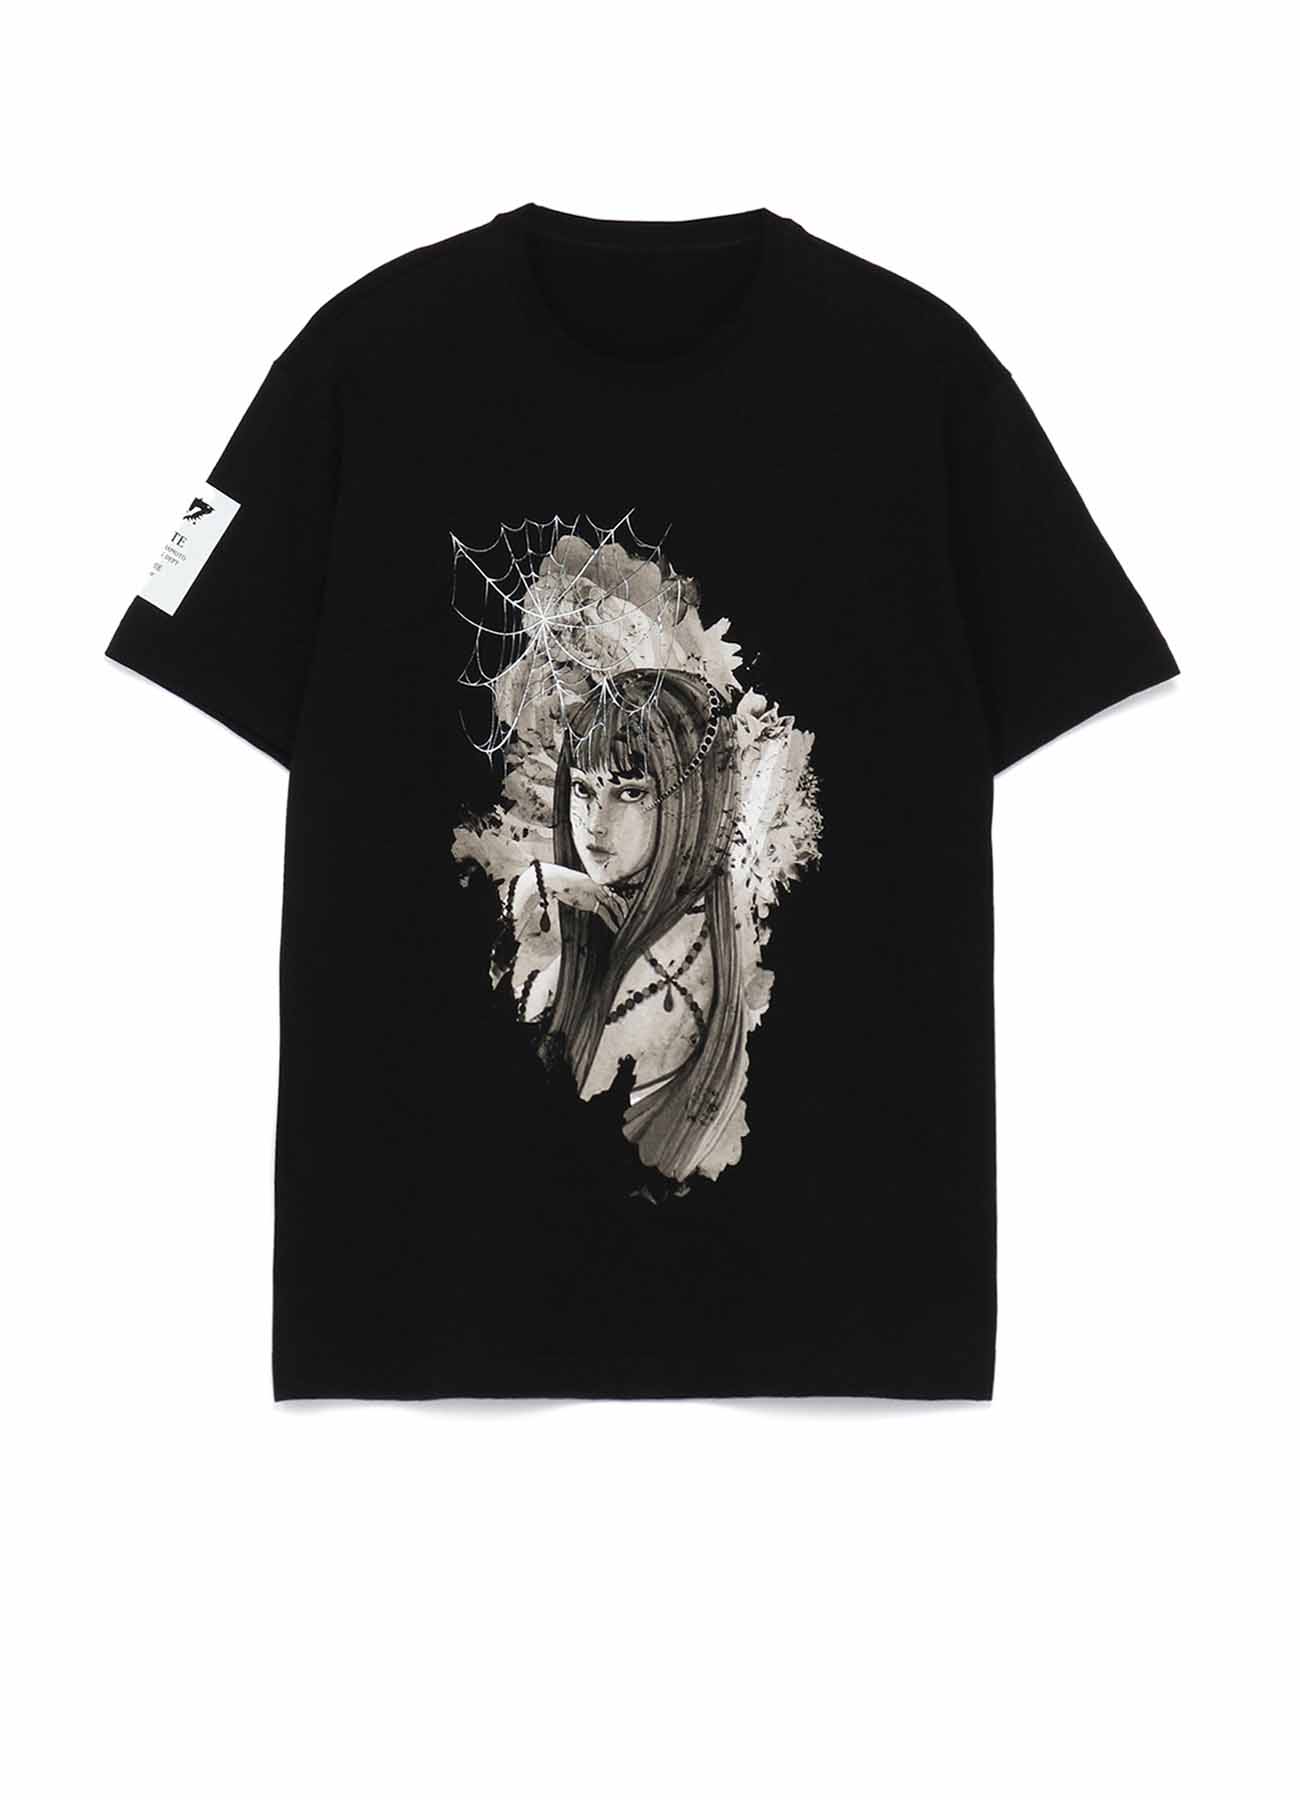 "Tomie" Flowers and Spider Web T-shirt